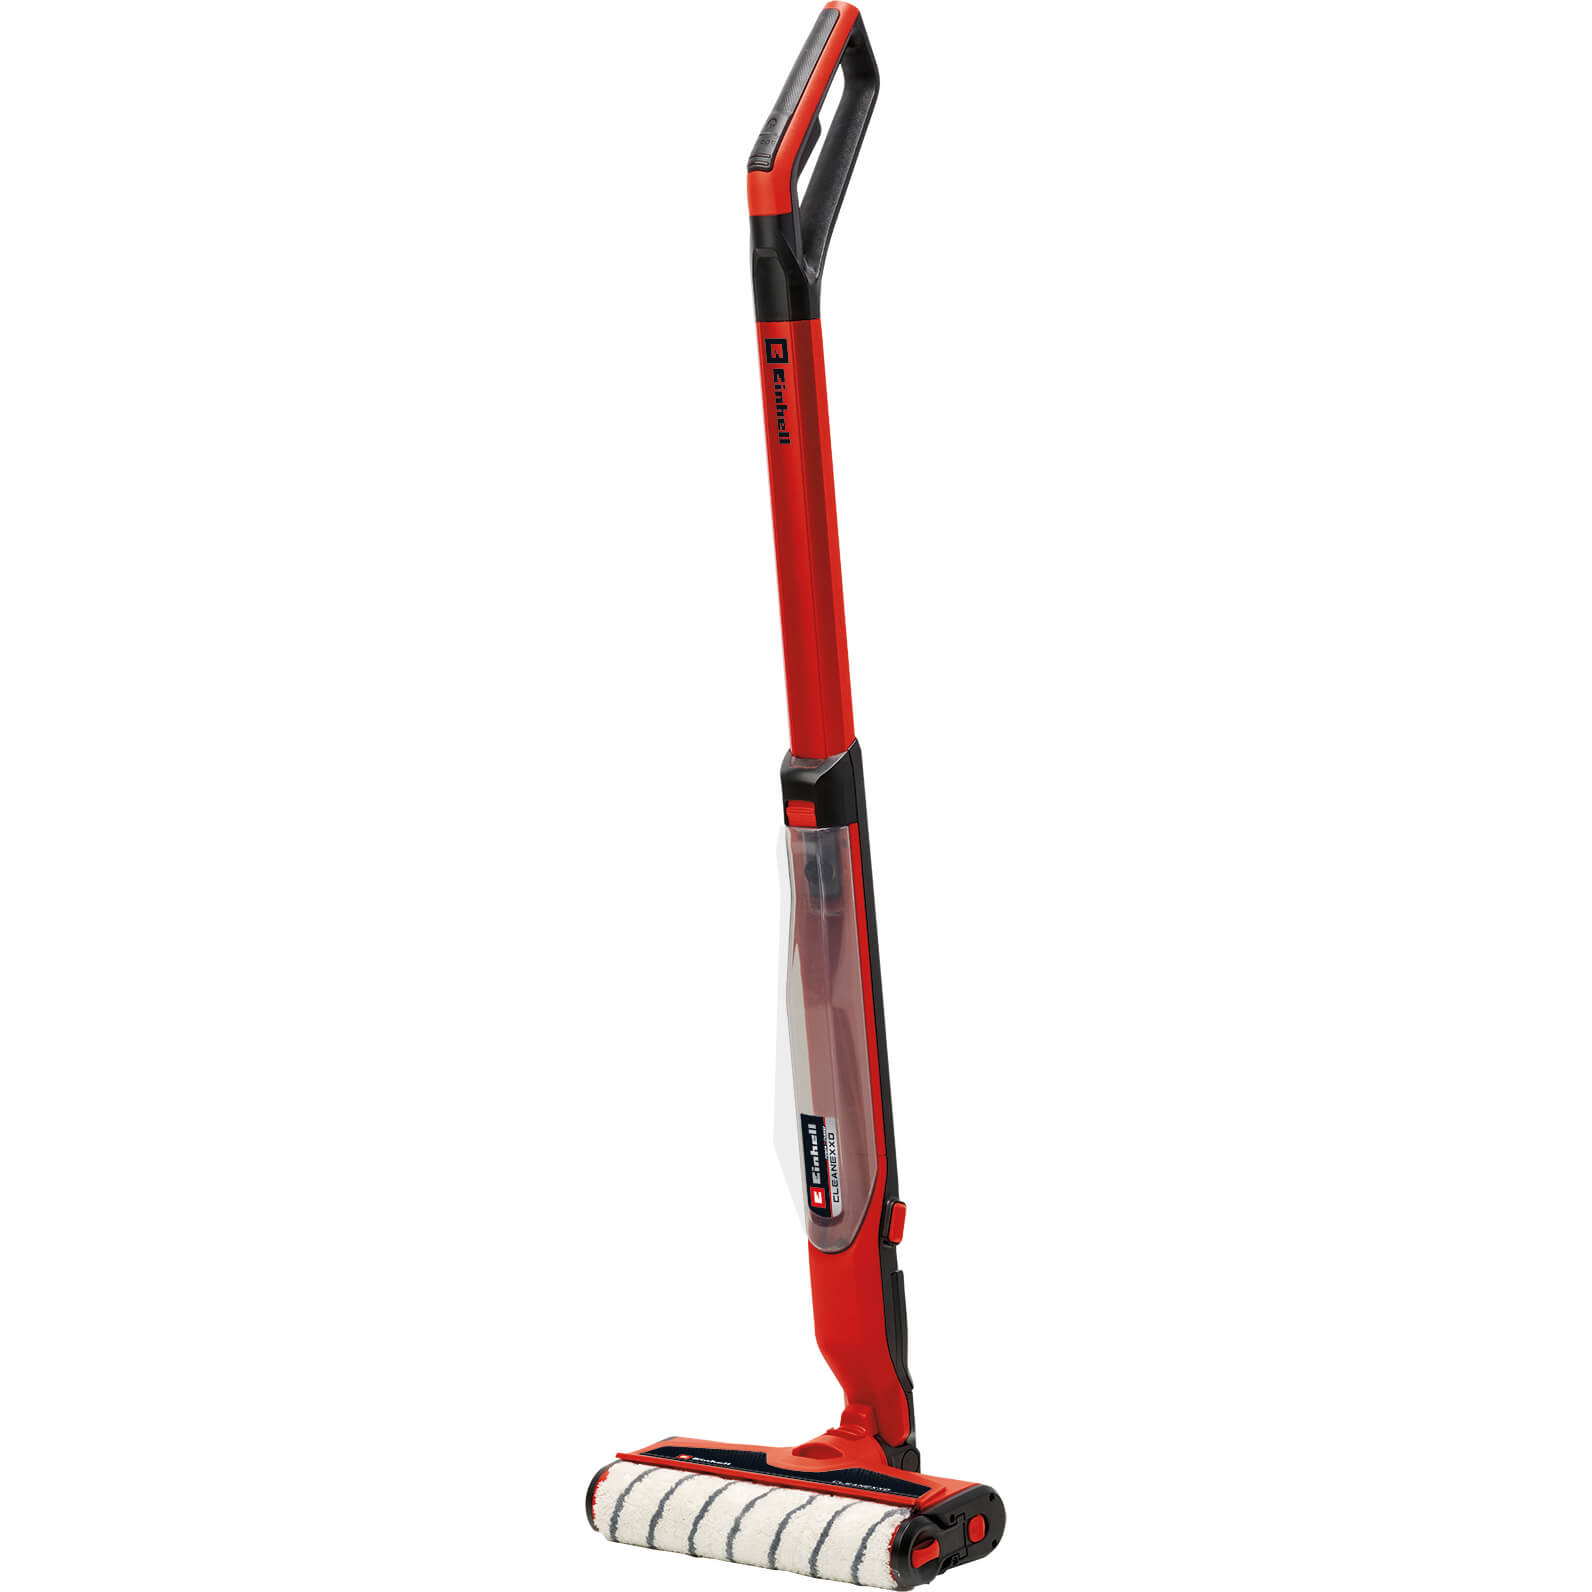 Einhell CLEANEXXO 18v Cordless Hard Floor Cleaner No Batteries No Charger